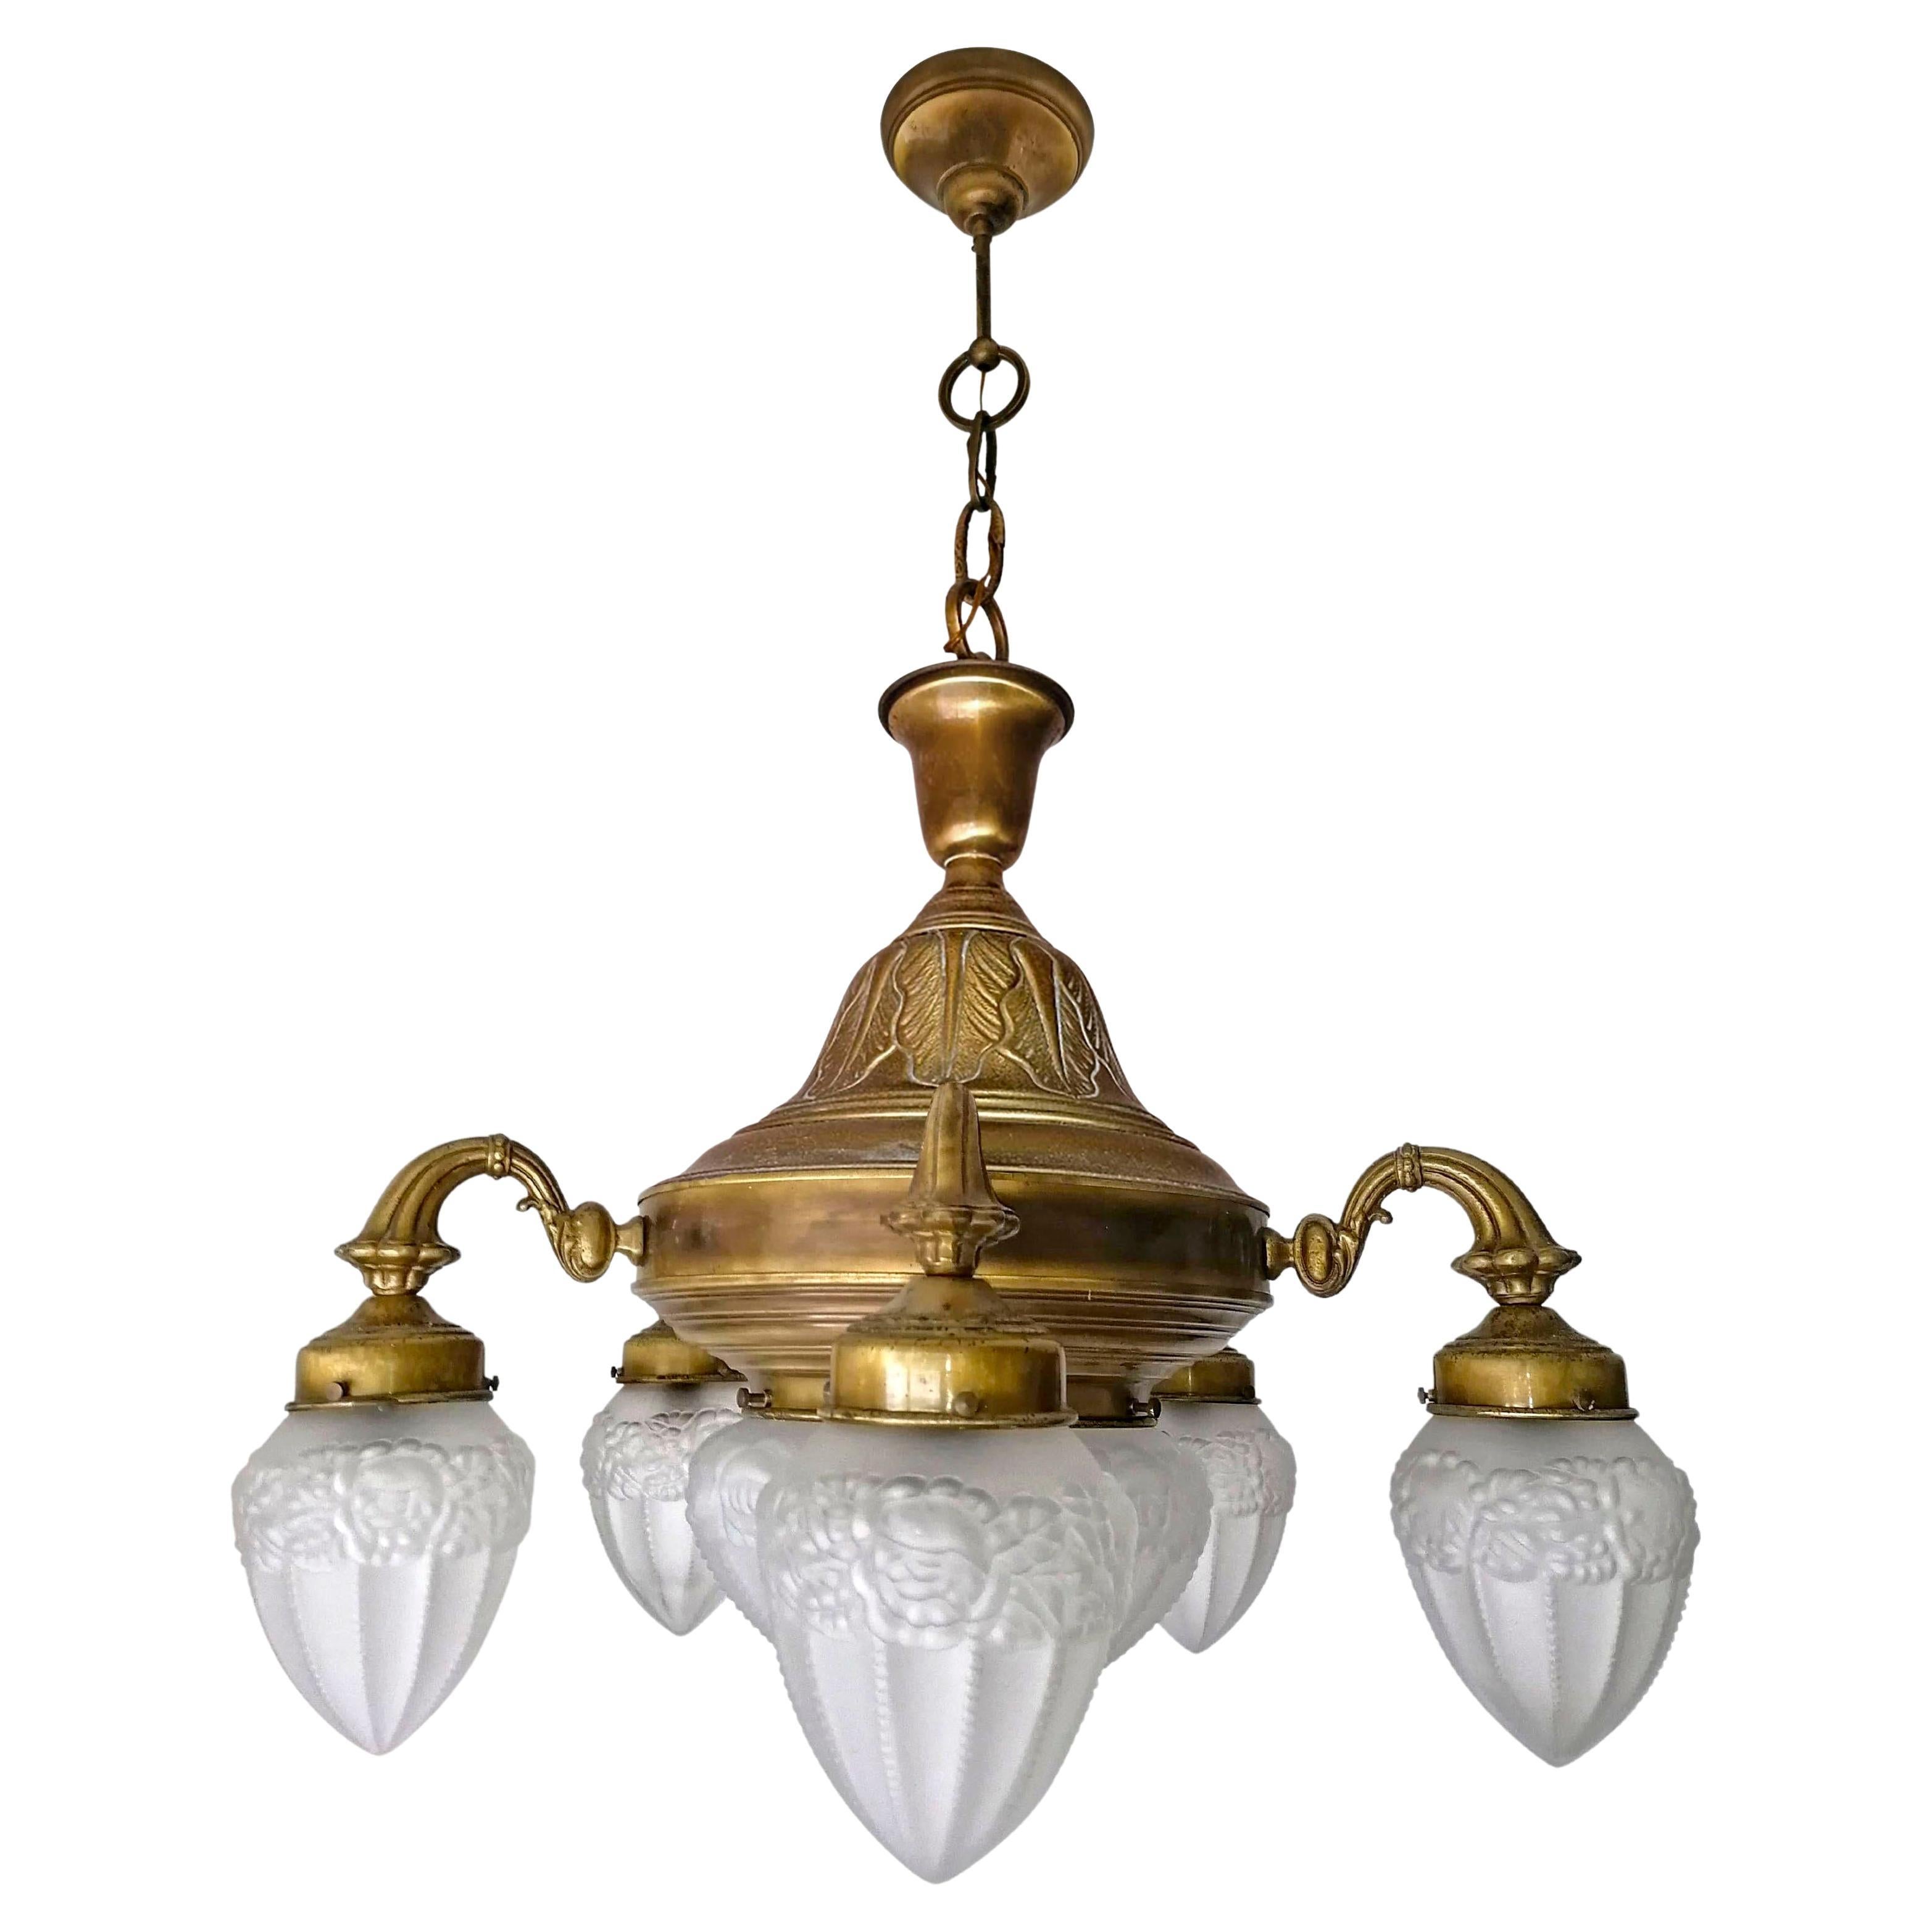 Lg French Art Deco & Art Nouveau Chandelier, Engraved Gilt Brass & Frosted Glass In Good Condition For Sale In Coimbra, PT